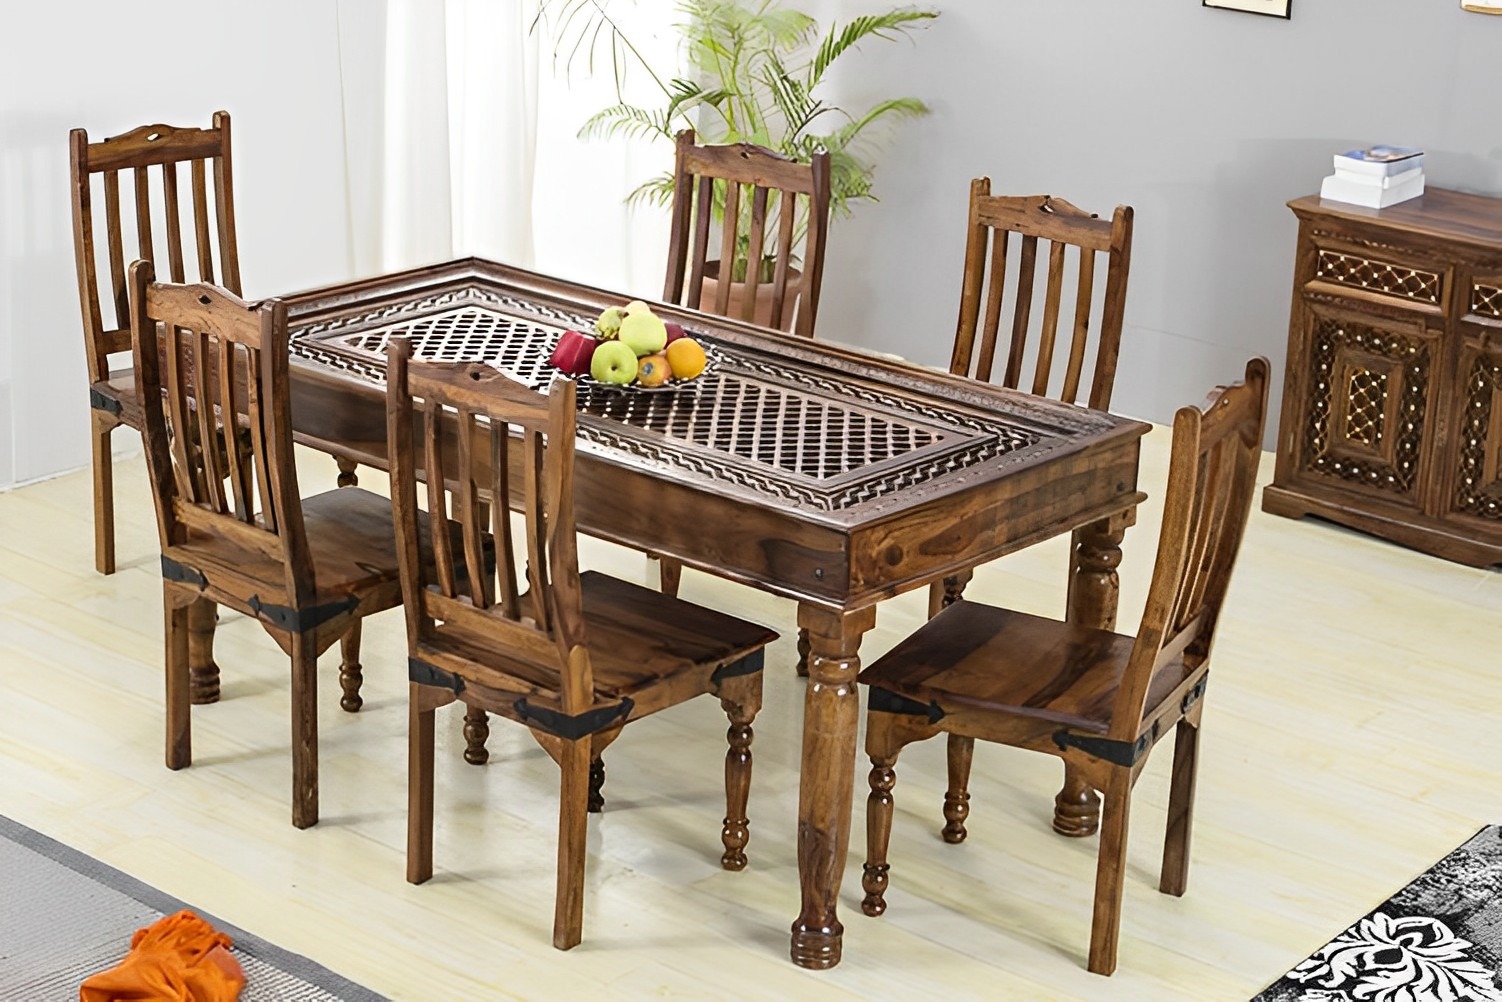  Buy a Sheesham Wood 6 Seater Dining Table Set Upto 60% off